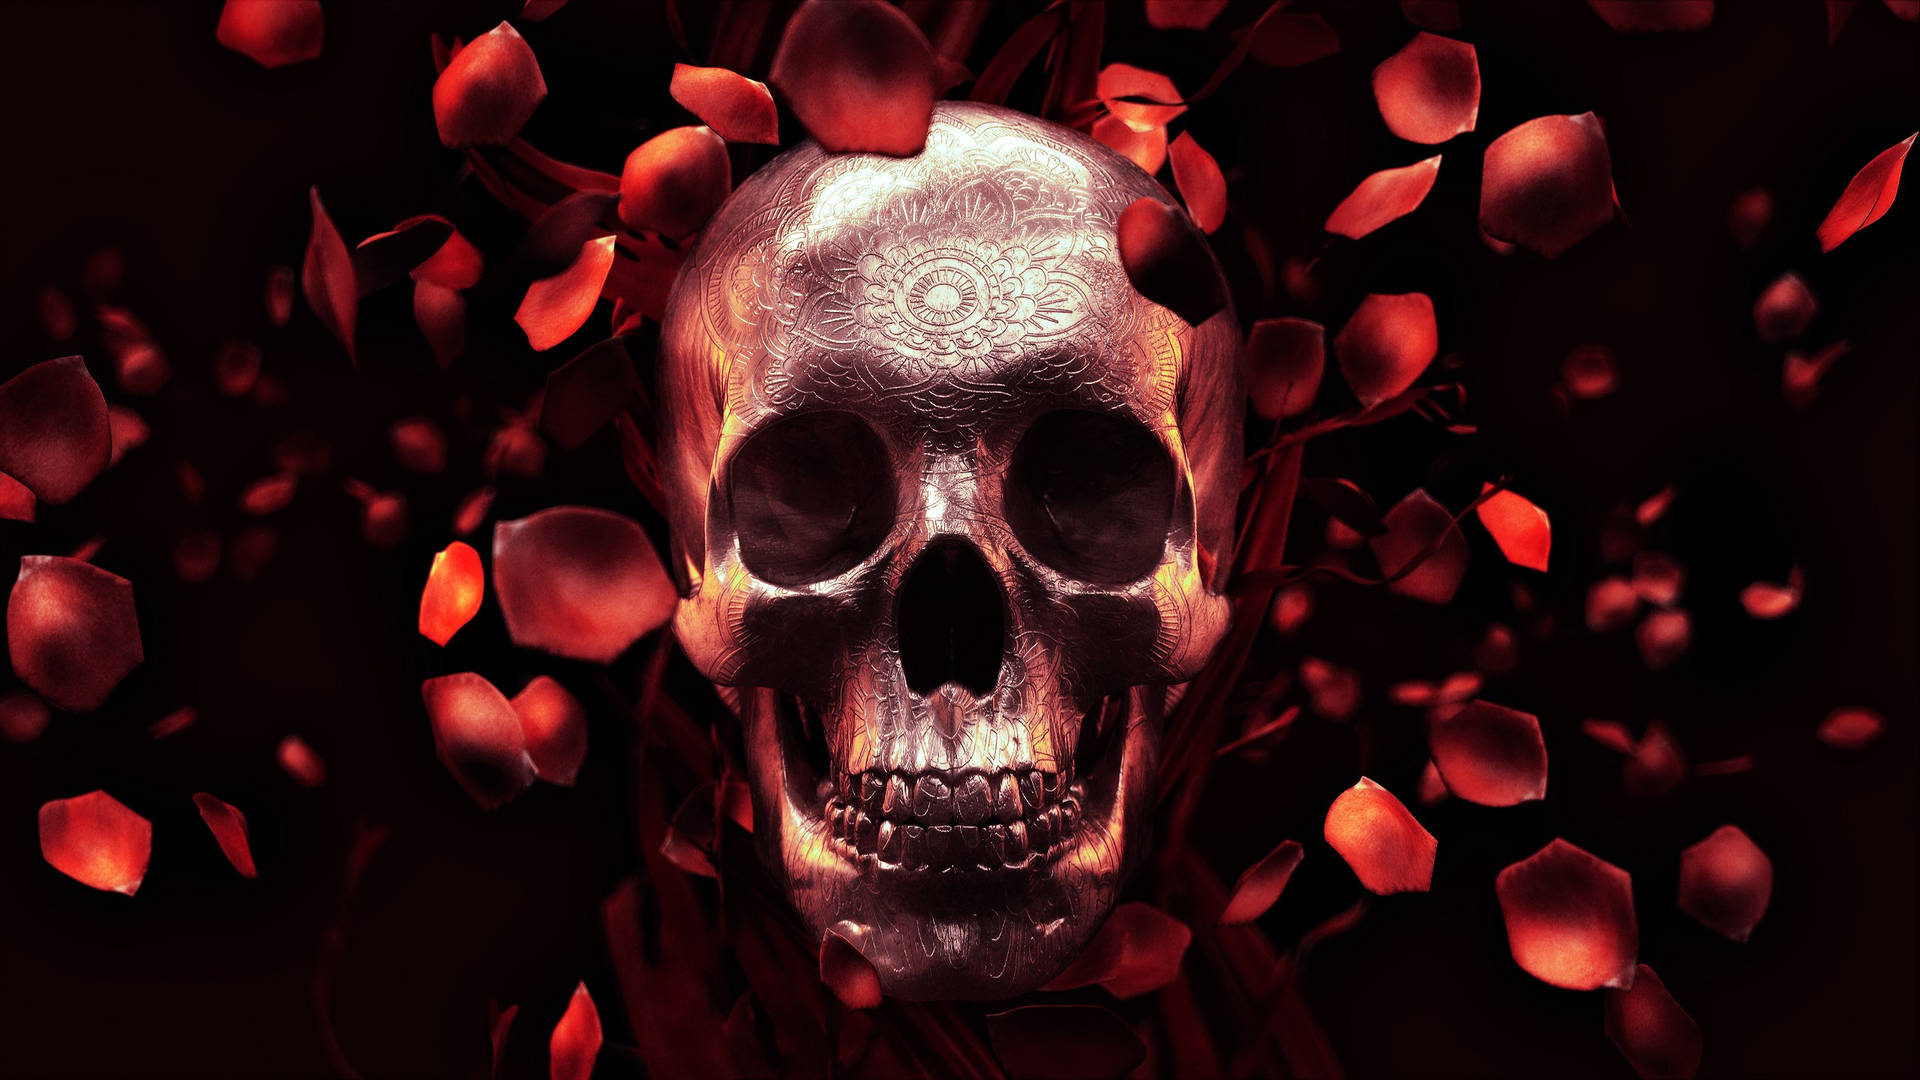 Hd Skull With Red Petals